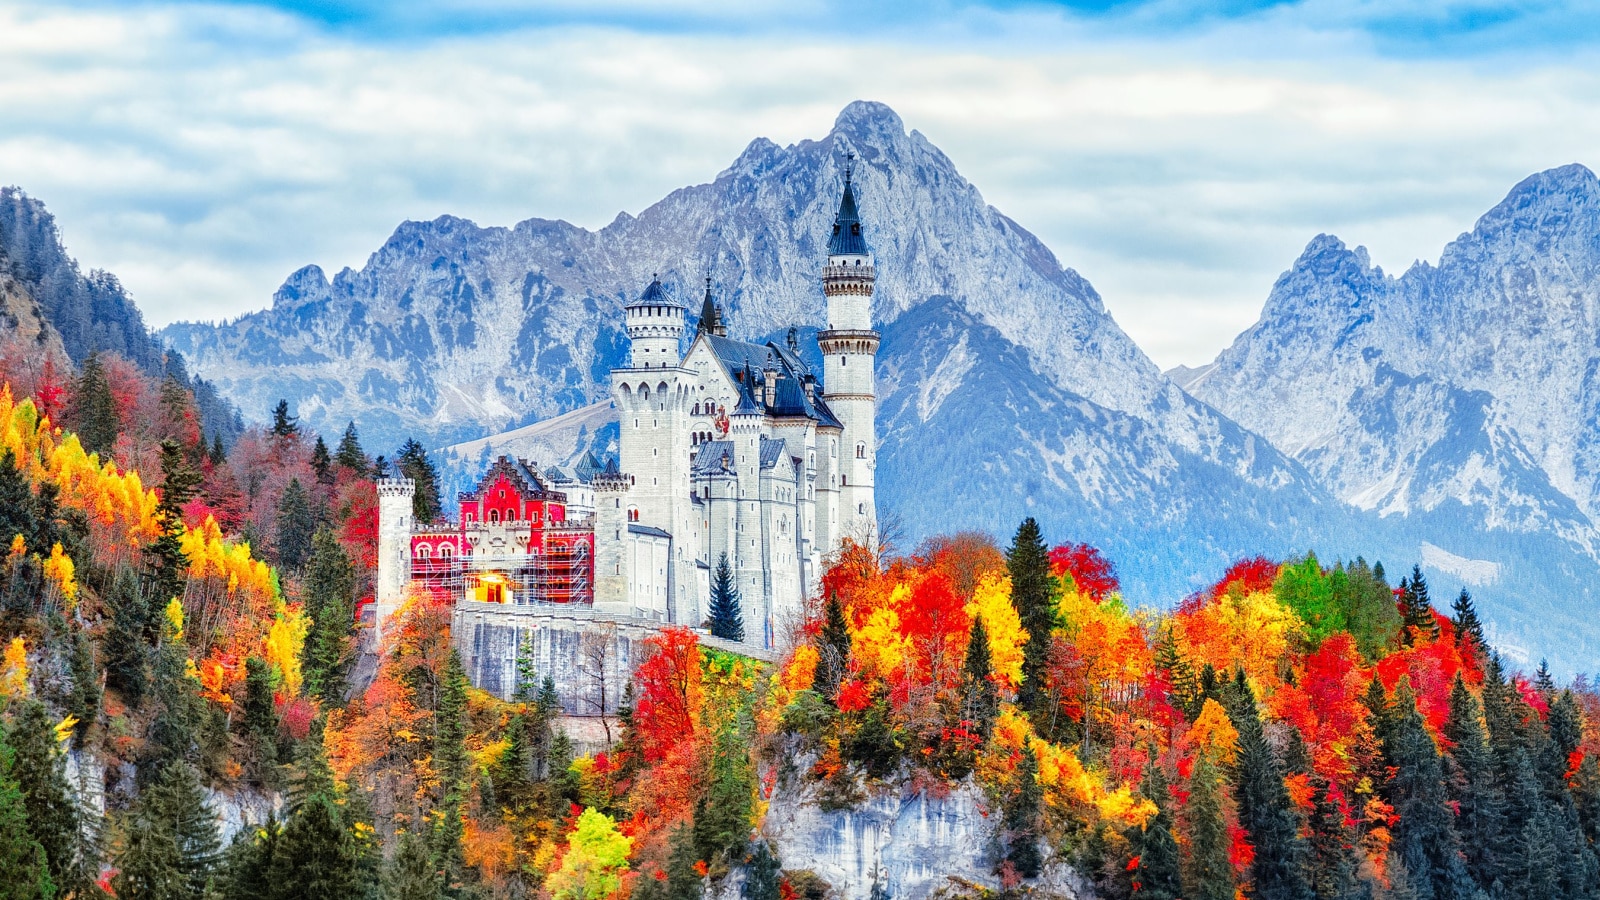 <p>For castle enthusiasts, the Neuschwanstein Castle in Germany is a dream destination. Nestled in the Bavarian Alps, the castle’s location, surrounded by breathtaking scenery, adds charm. No wonder one enthusiast claimed it as one of the most stunning places they have ever visited.</p>